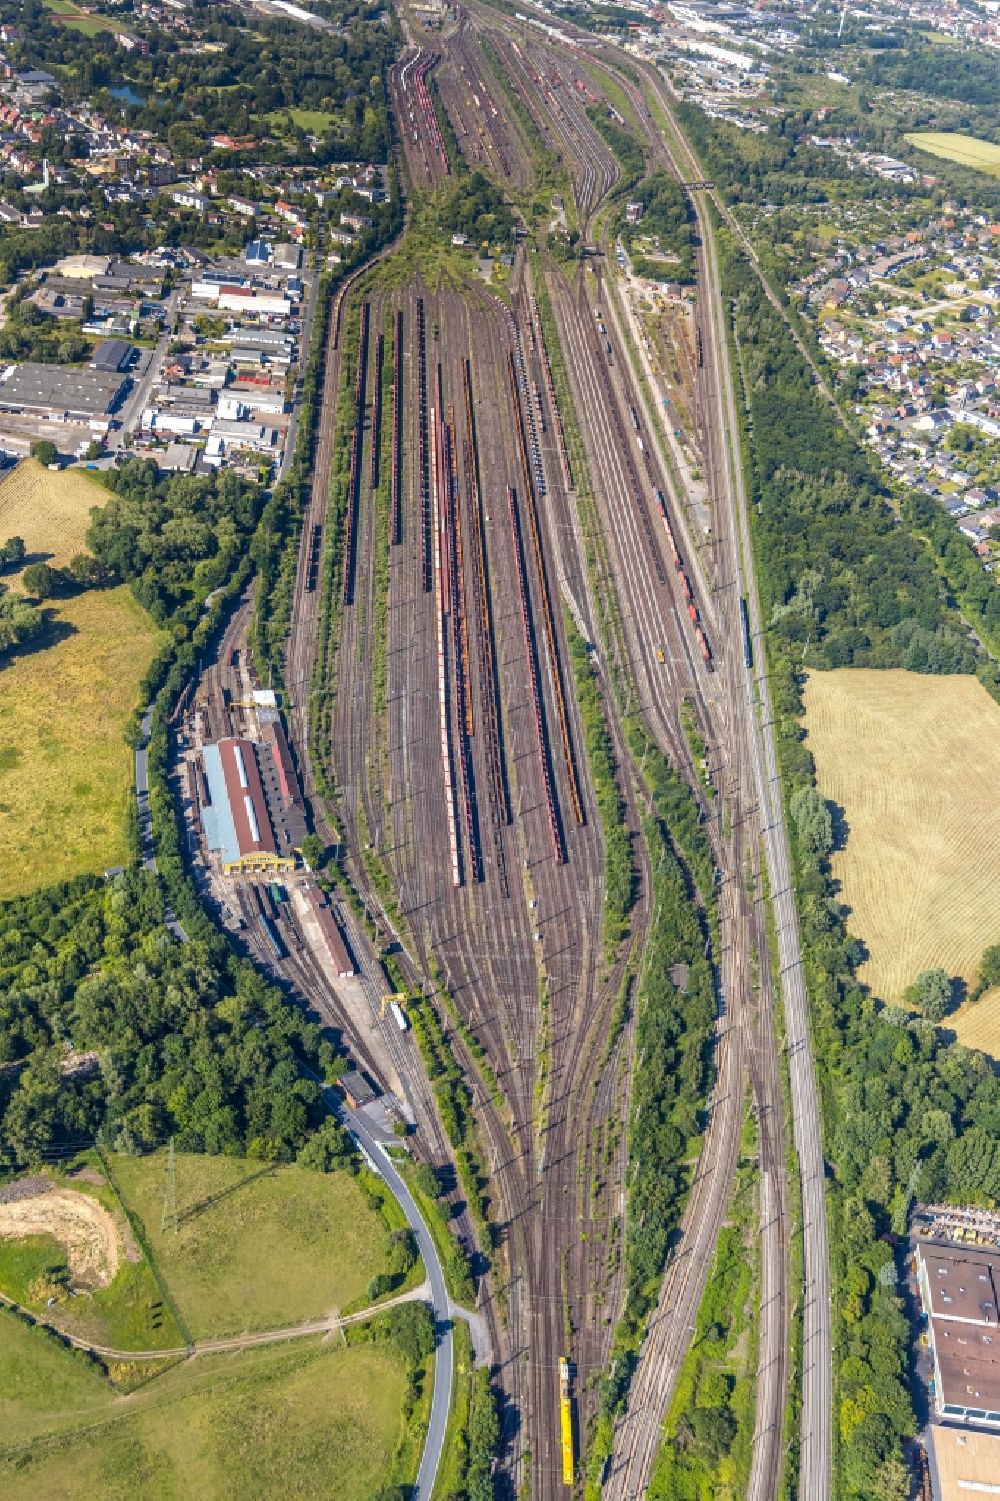 Hamm from the bird's eye view: Marshalling yard and freight station of the Deutsche Bahn in Hamm in the state North Rhine-Westphalia, Germany